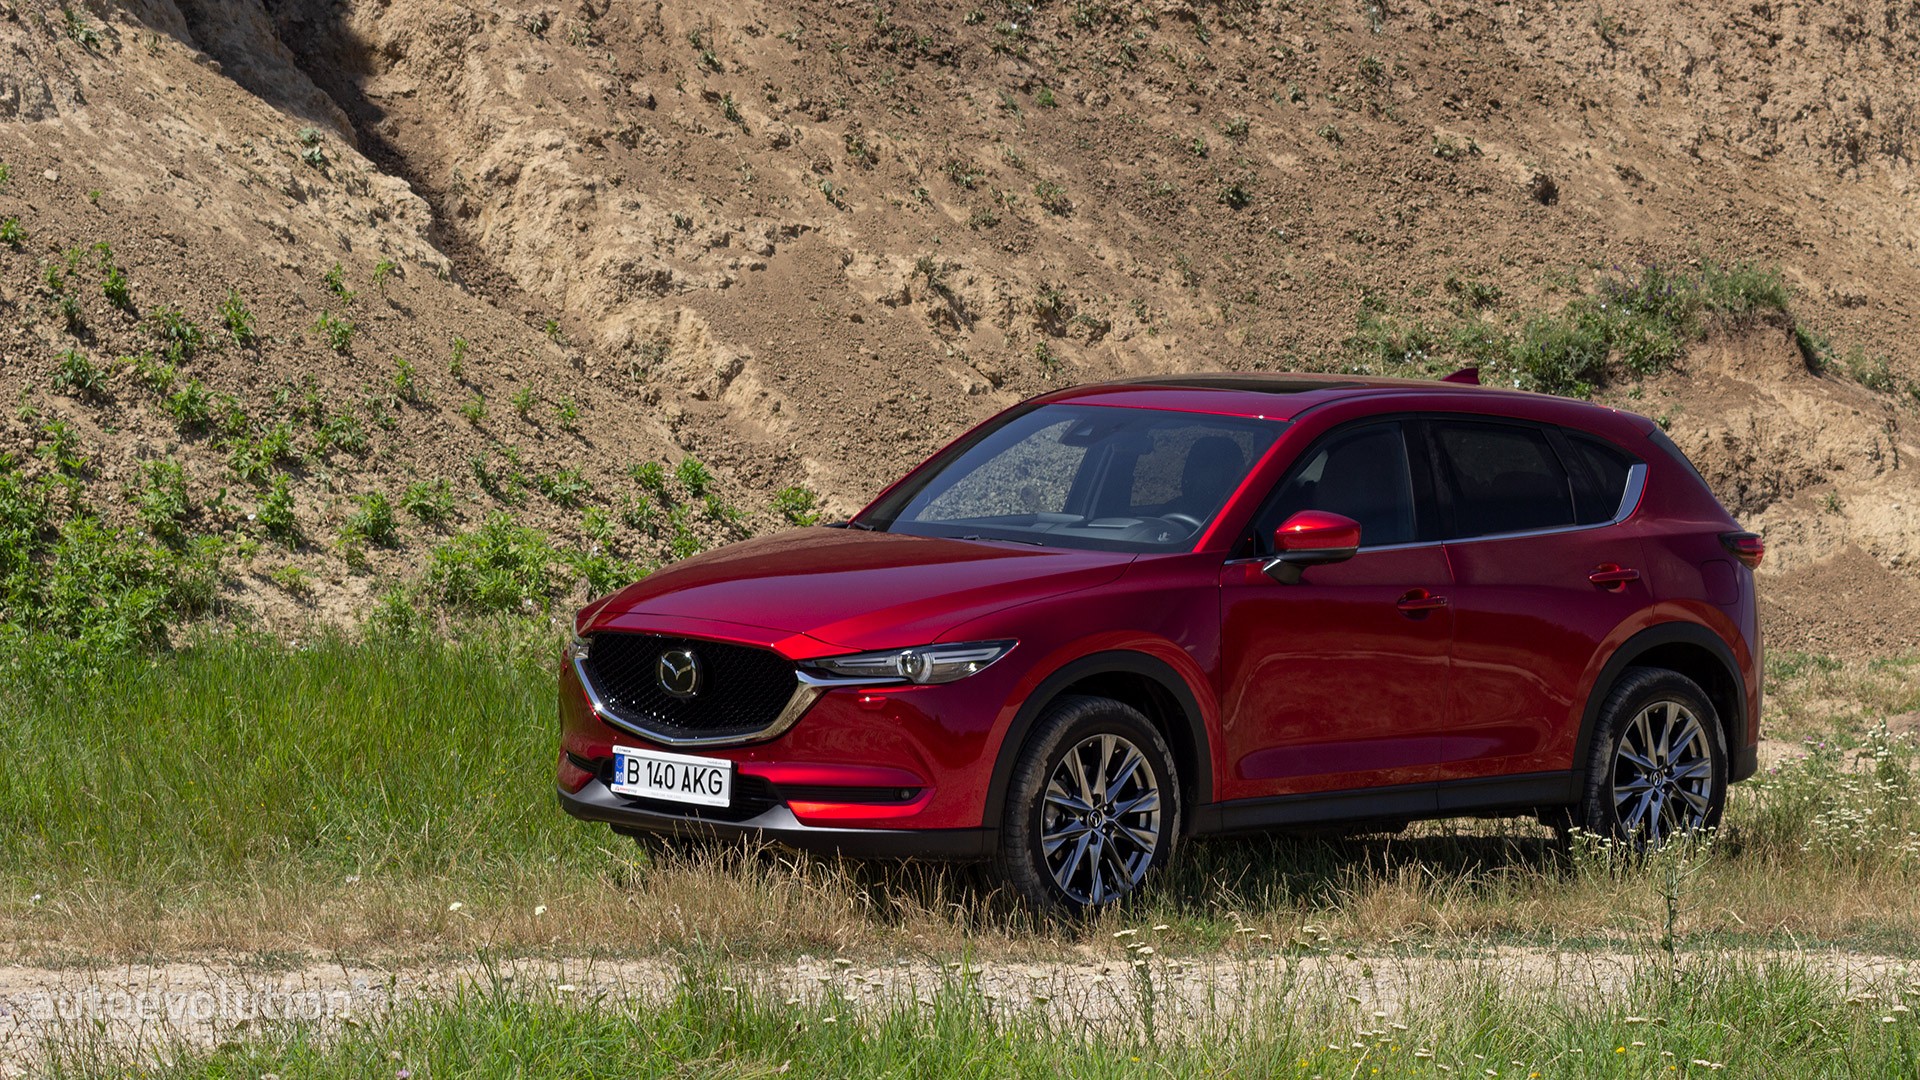 Mazda Cx 5 Updated In Japan For 2020 Model Year Autoevolution